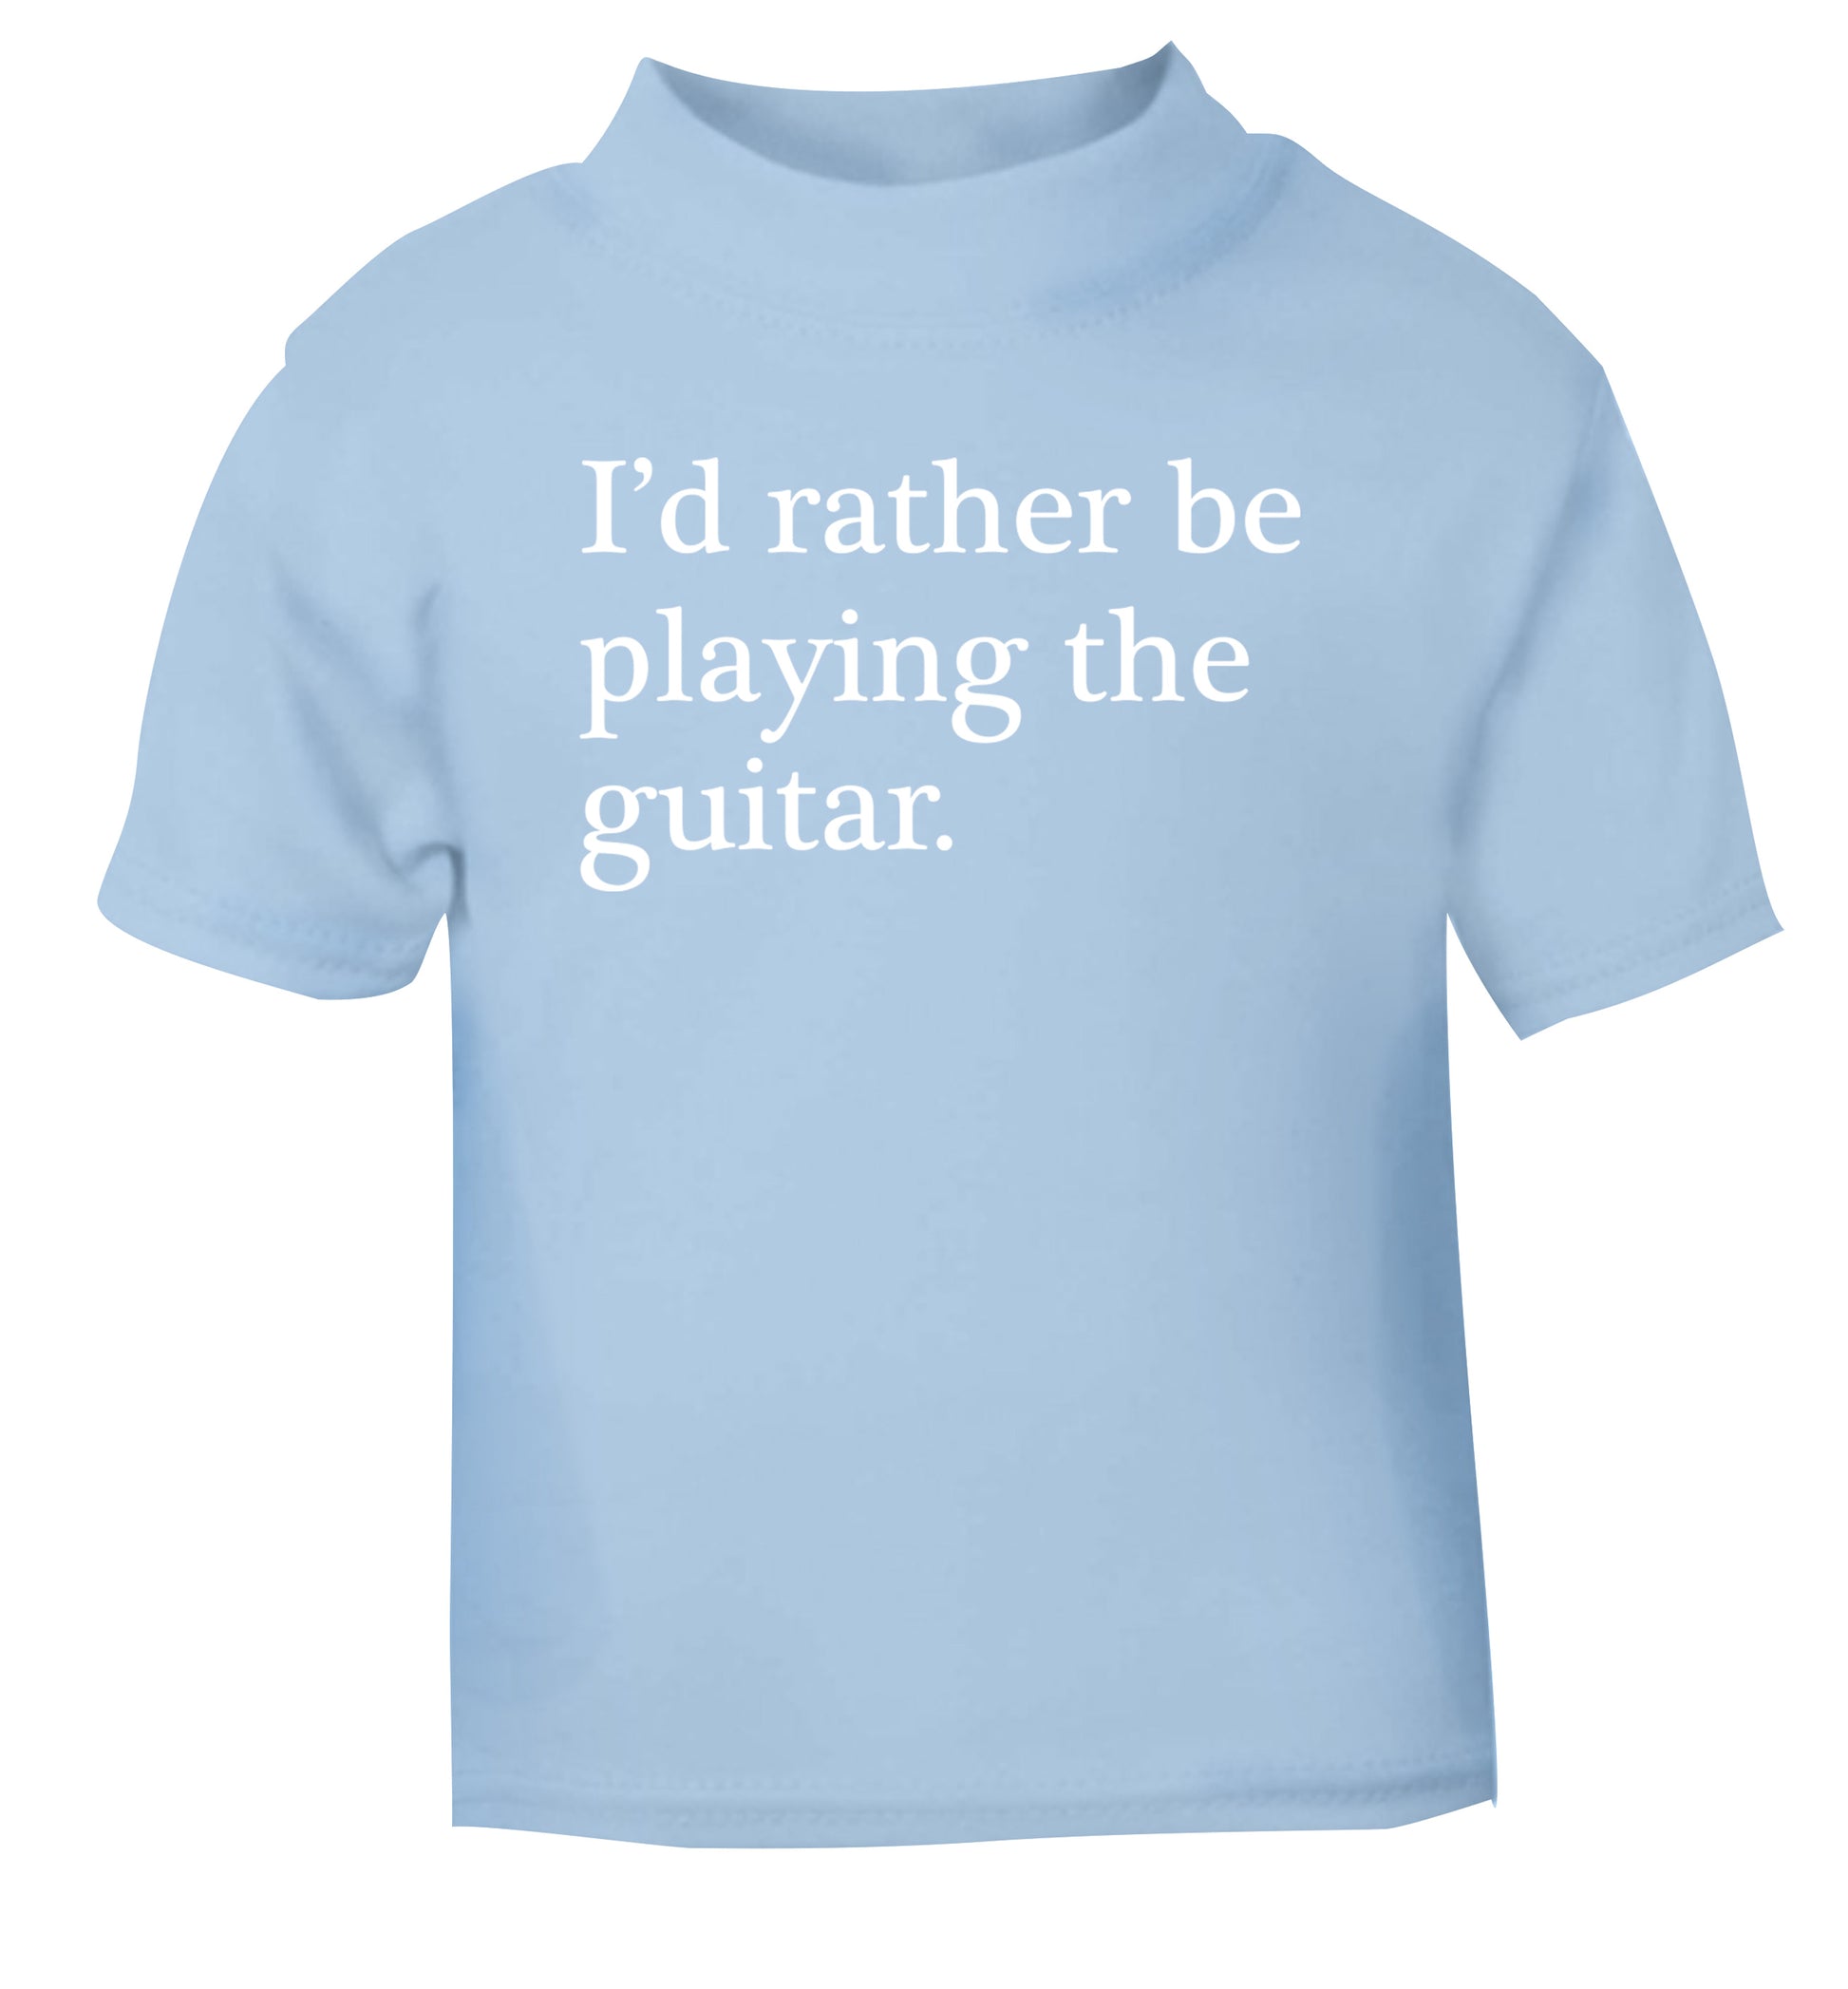 I'd rather be playing the guitar light blue Baby Toddler Tshirt 2 Years